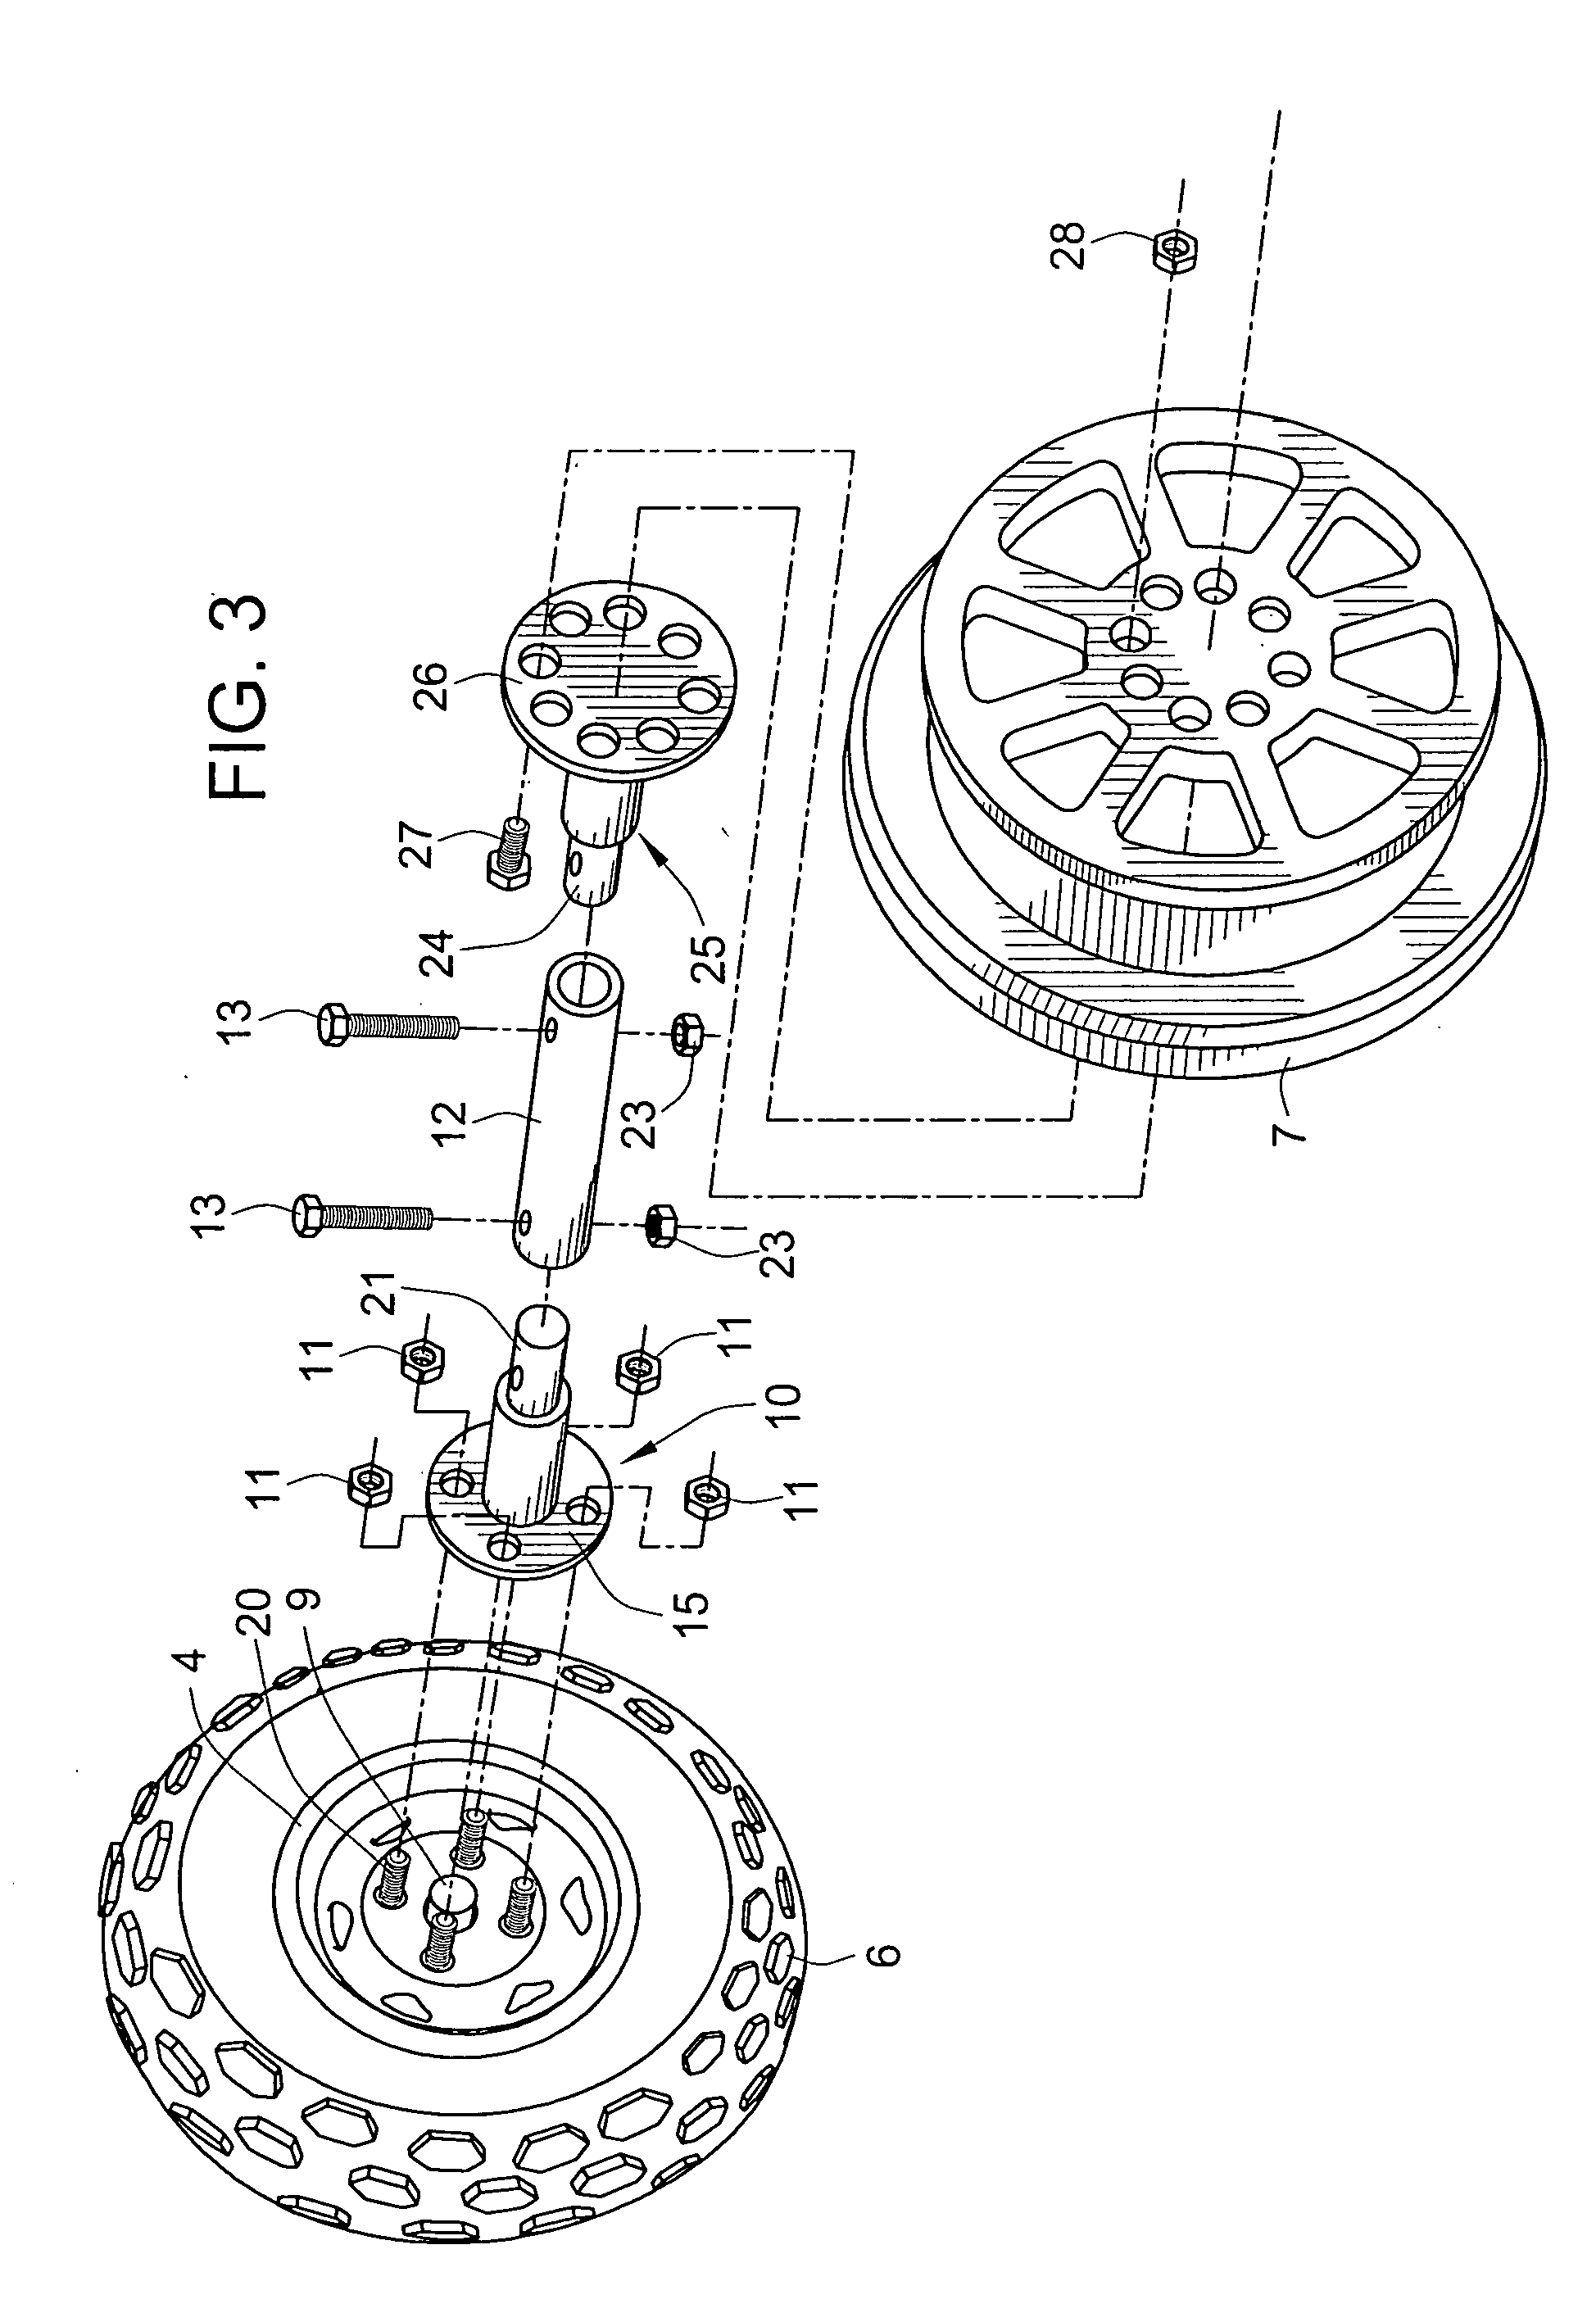 Convertible road and rail wheel assembly